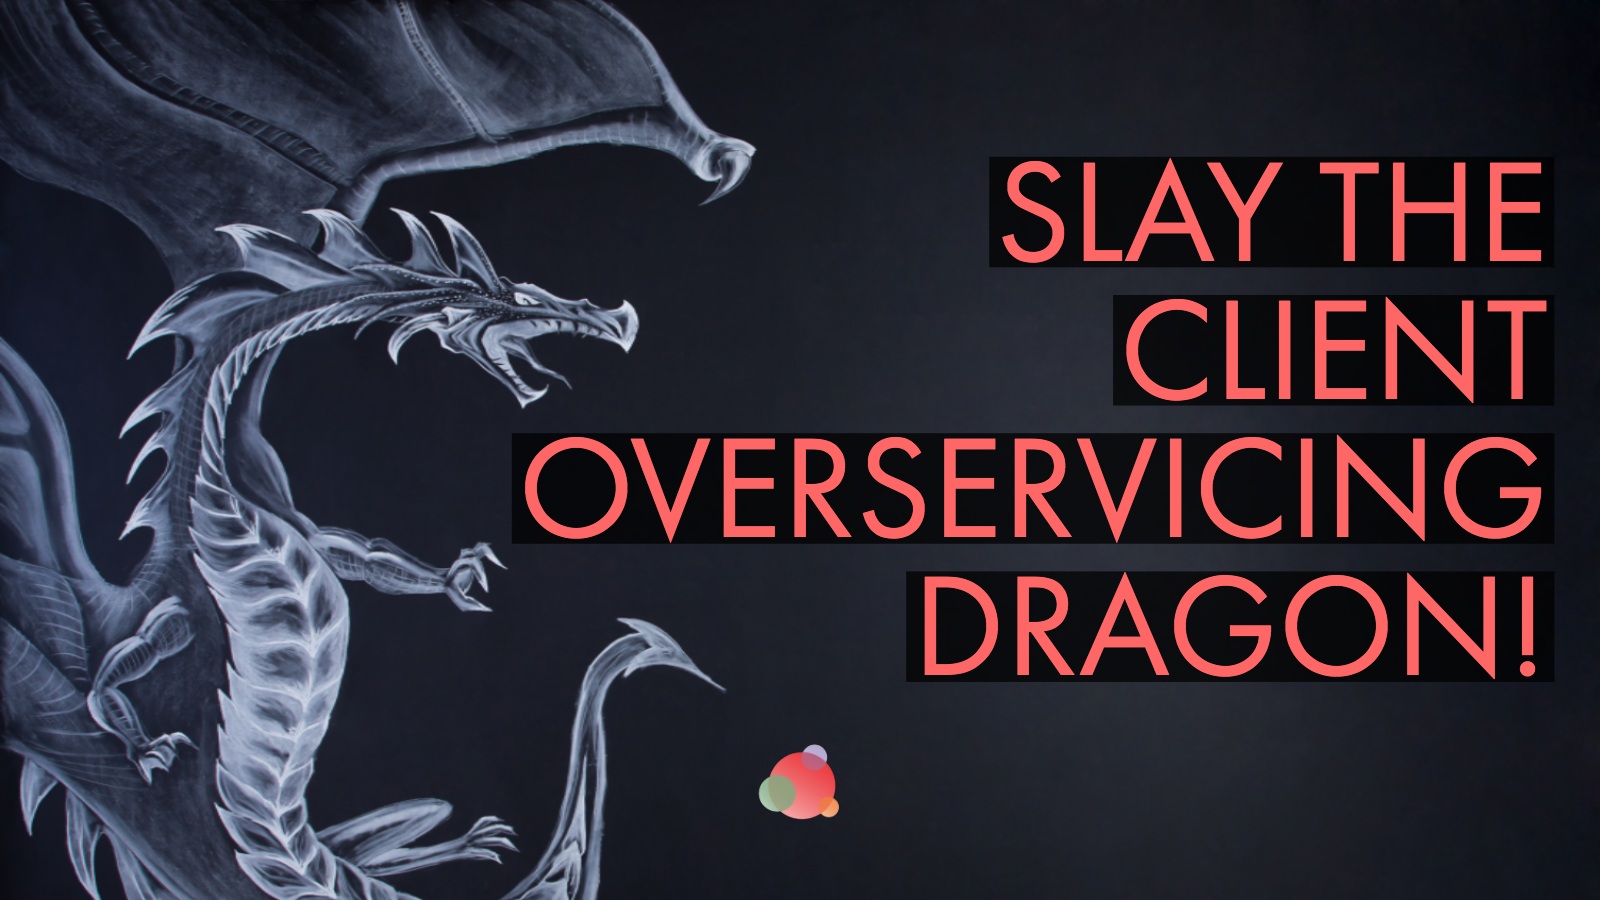 Slay the Over-Servicing Clients Dragon with These Five Questions